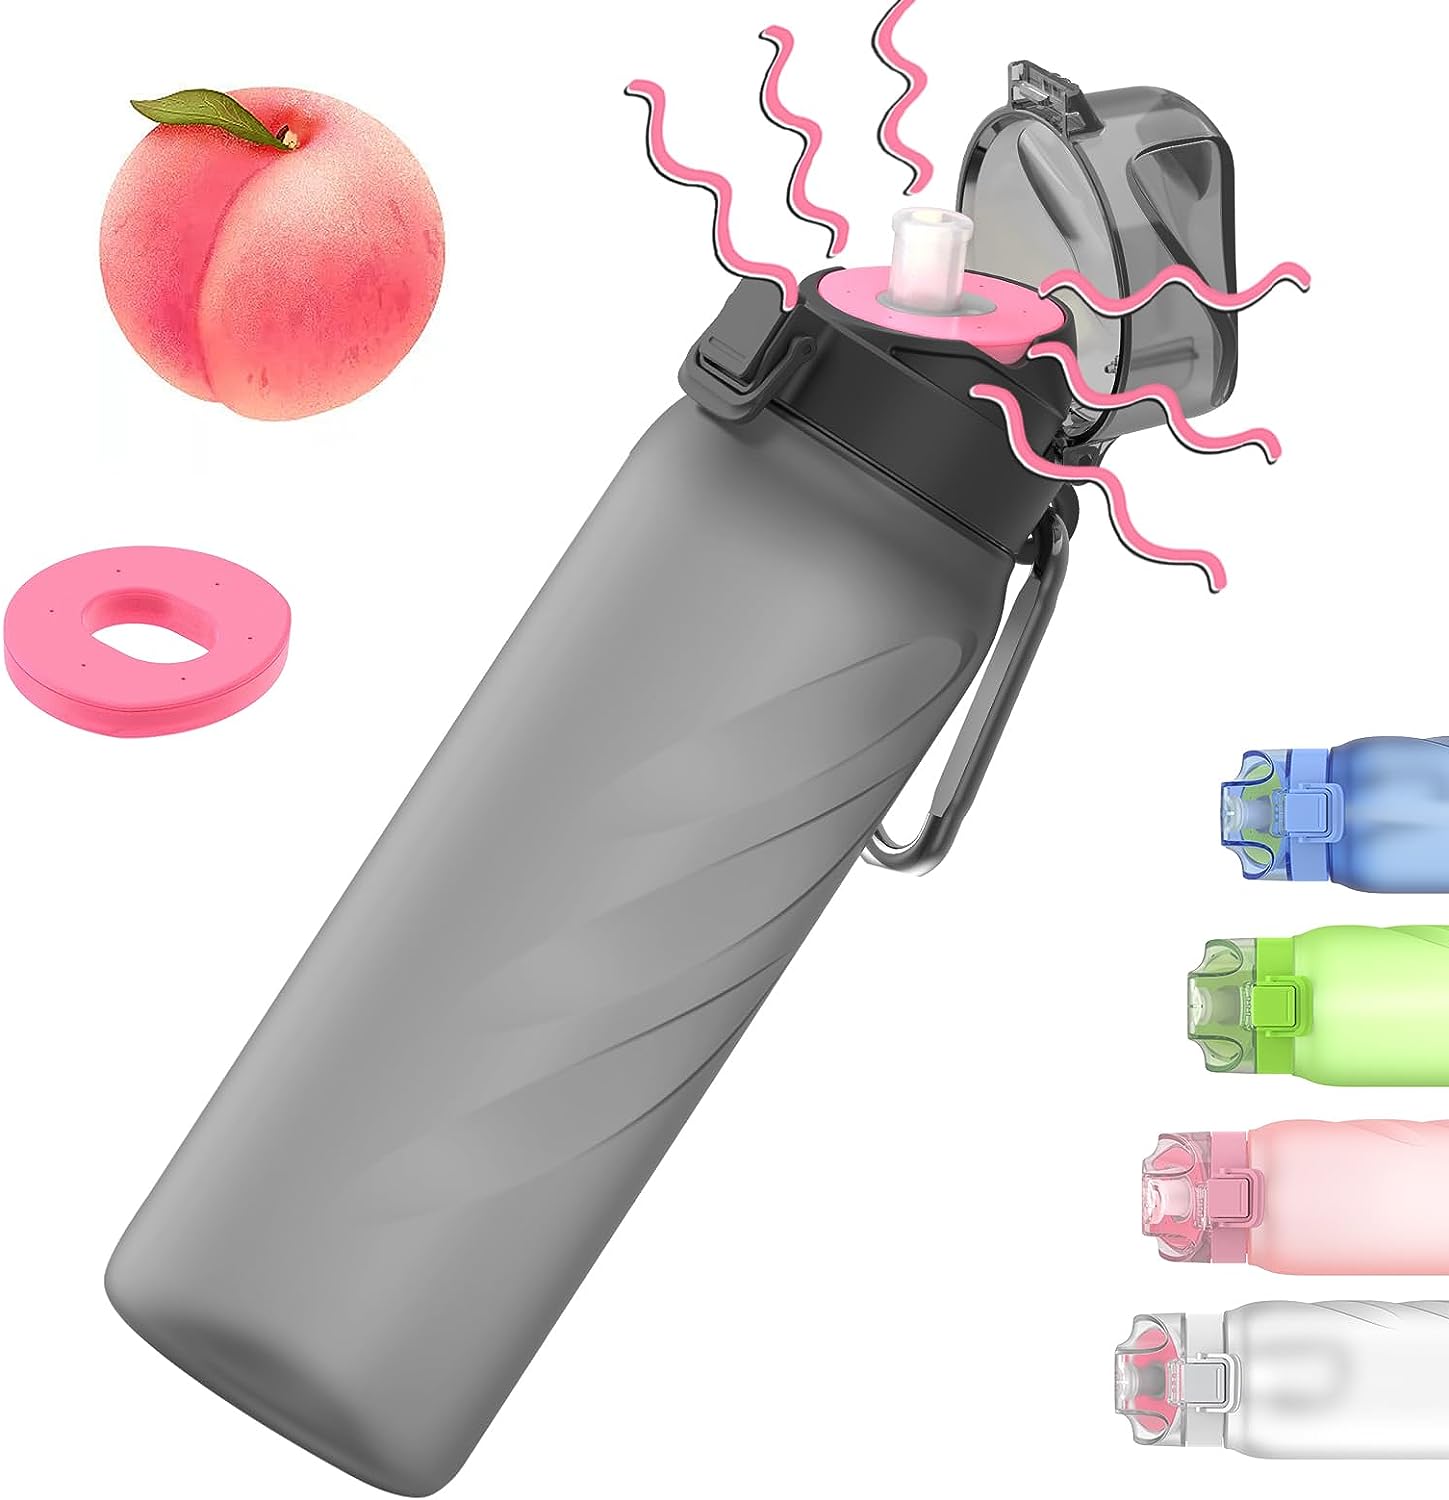 Pods Flavored Sports Water Cup Air Up Flavored Water Bottle Scent Water Cup  Flavor for Outdoor Fitness Straw Flavor Water Cup